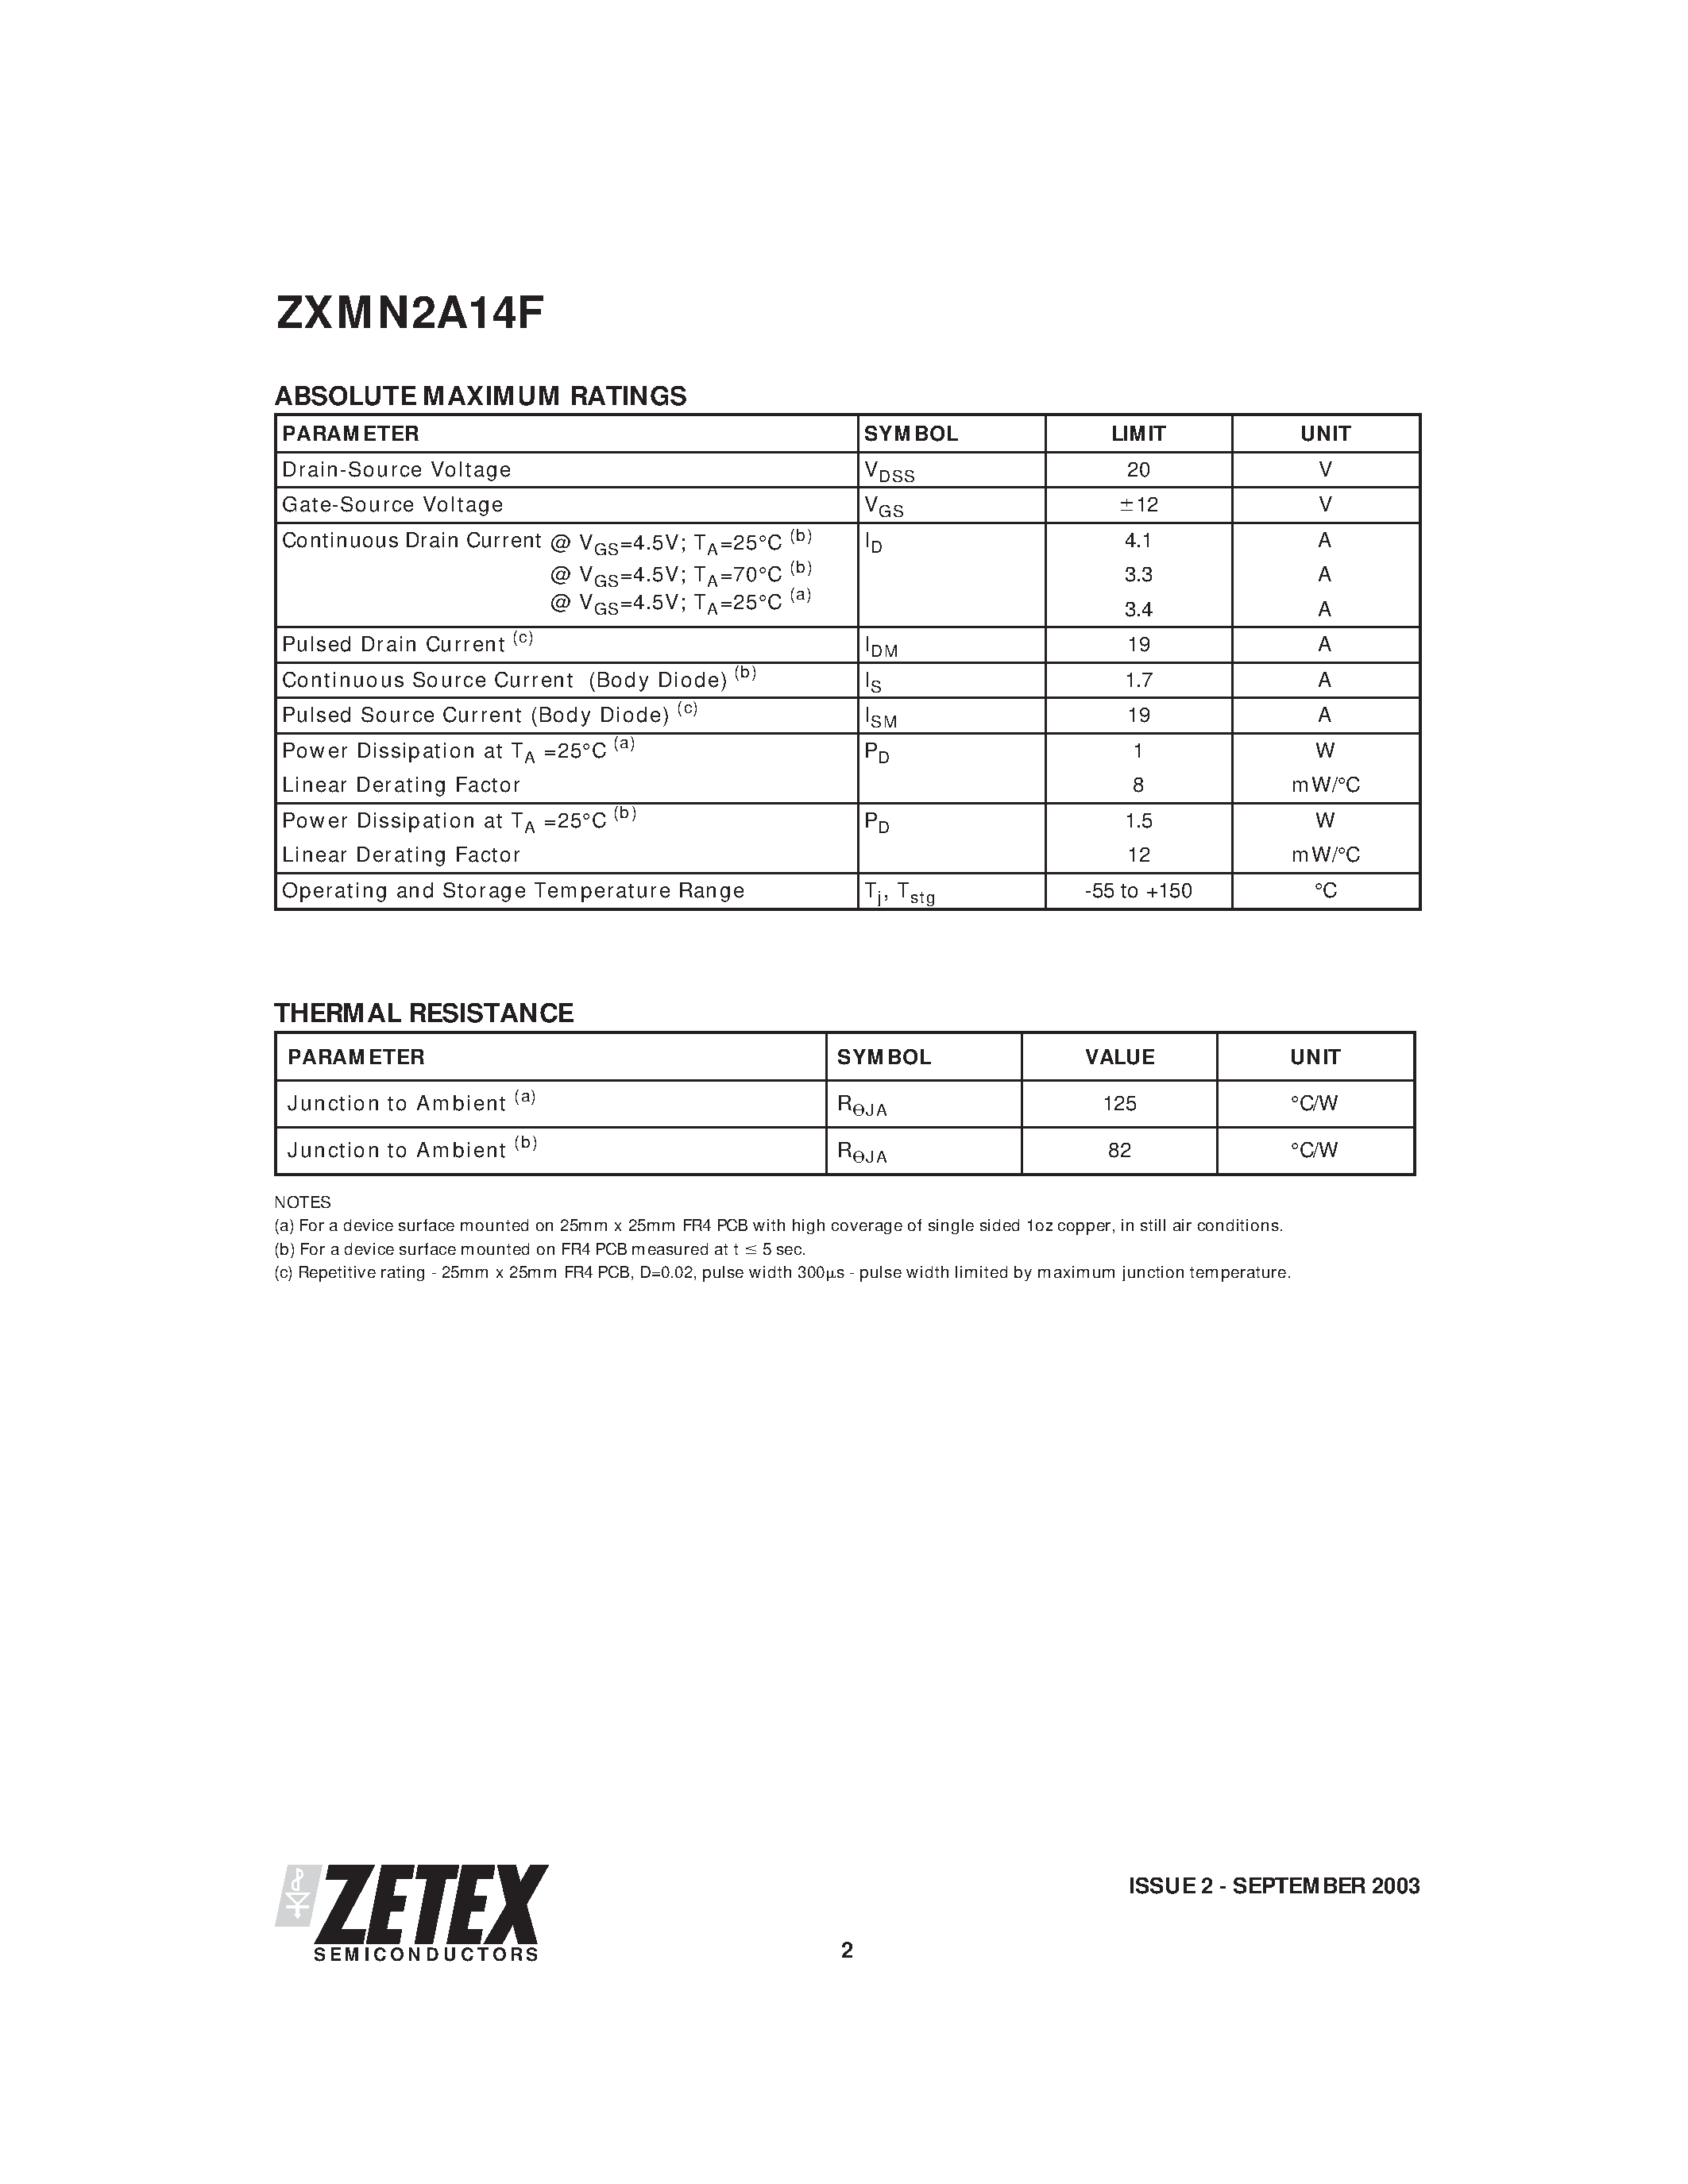 Datasheet ZXMN2A14F - 20V N-CHANNEL ENHANCEMENT MODE MOSFET page 2